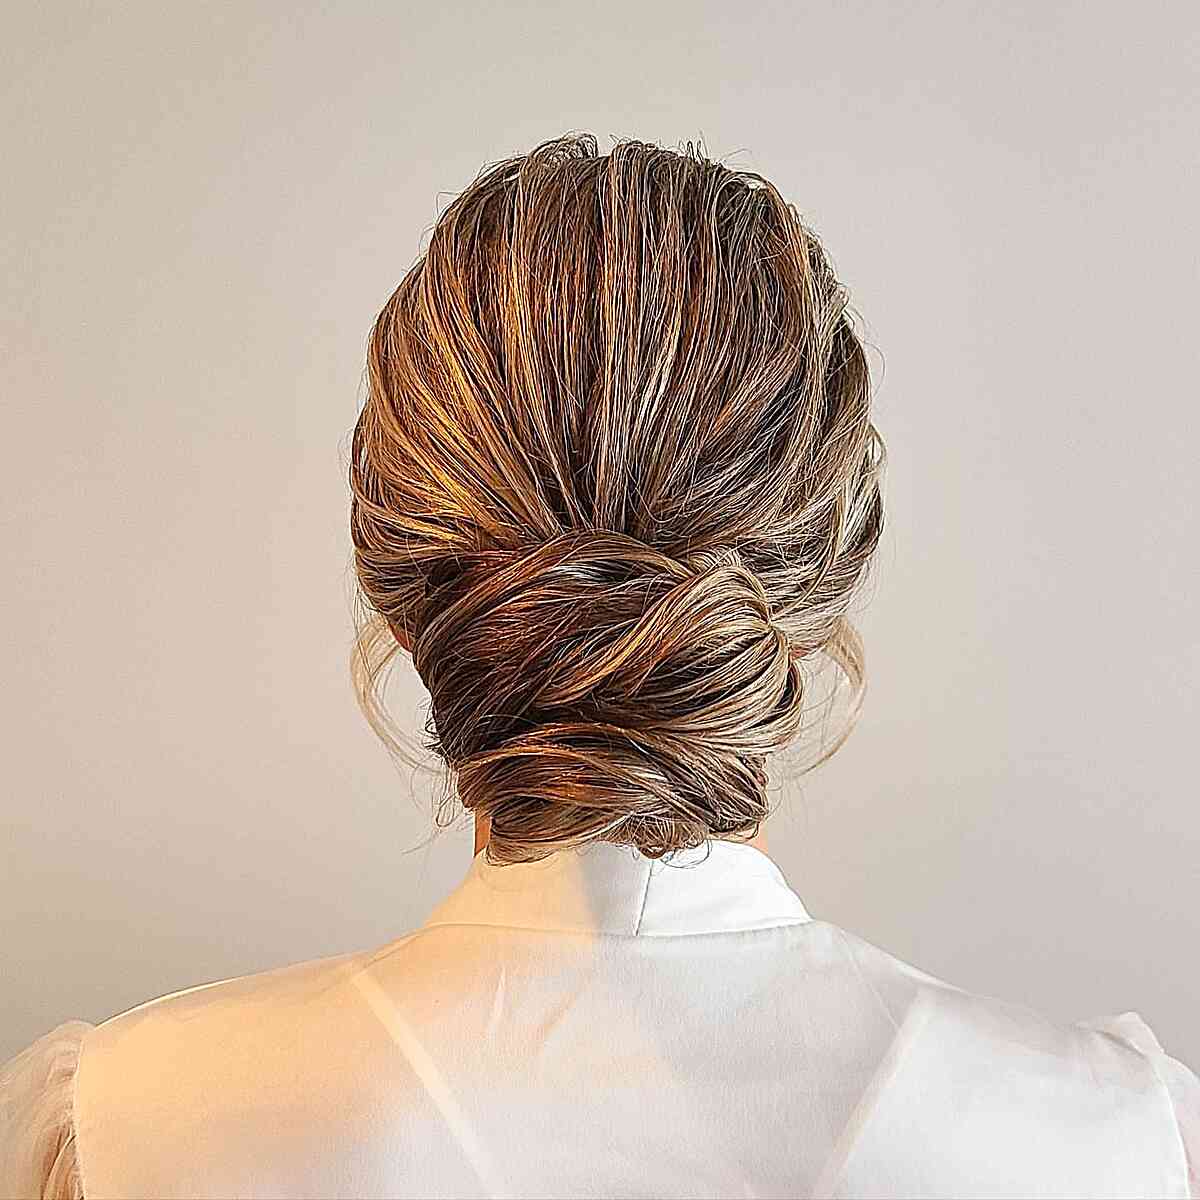 Stunning Long Hair in an Easy Updo